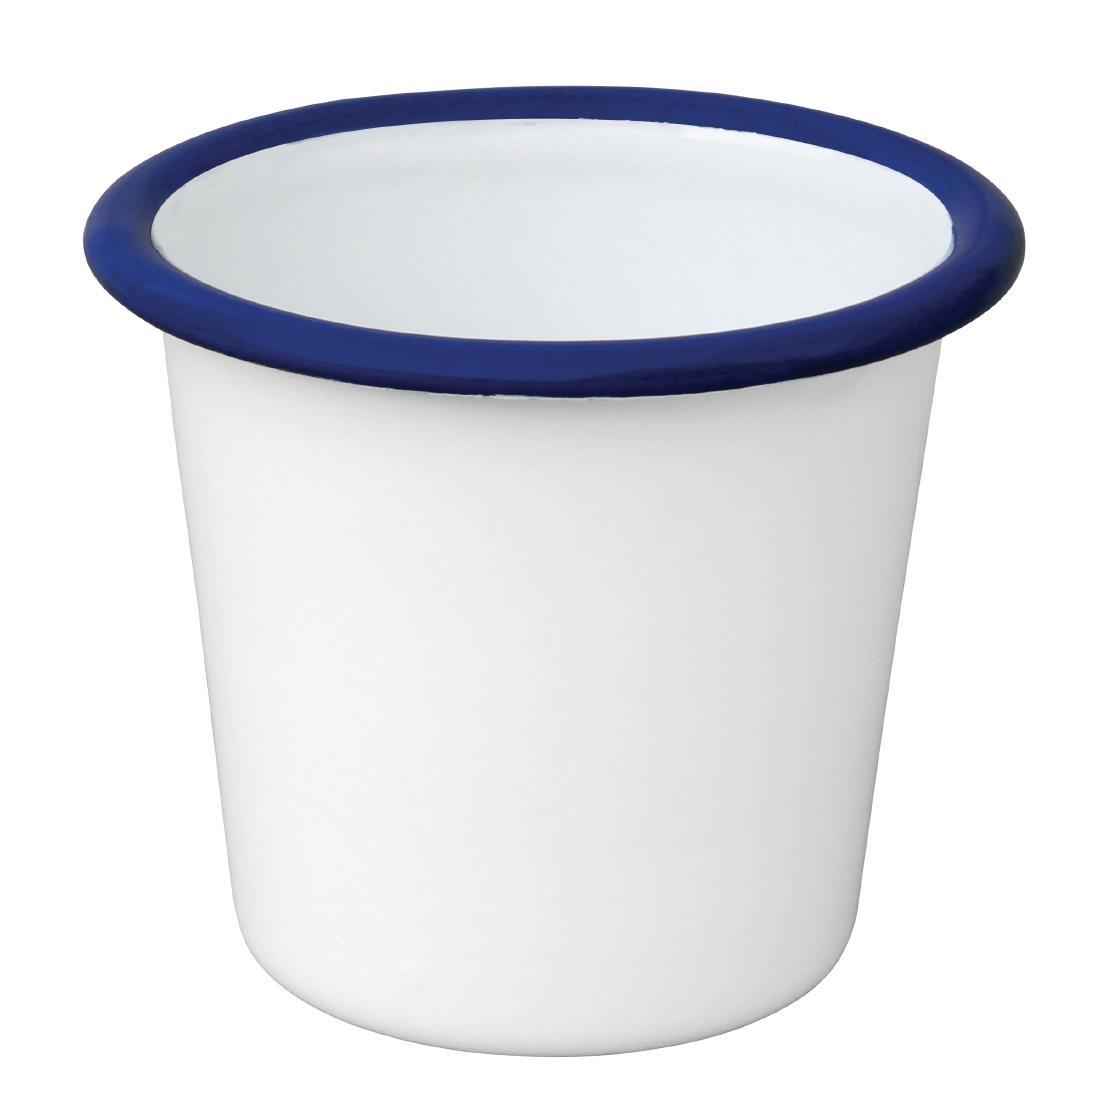 Olympia Enamel Sauce Cup White and Blue (Pack of 6) - DC383  - 2